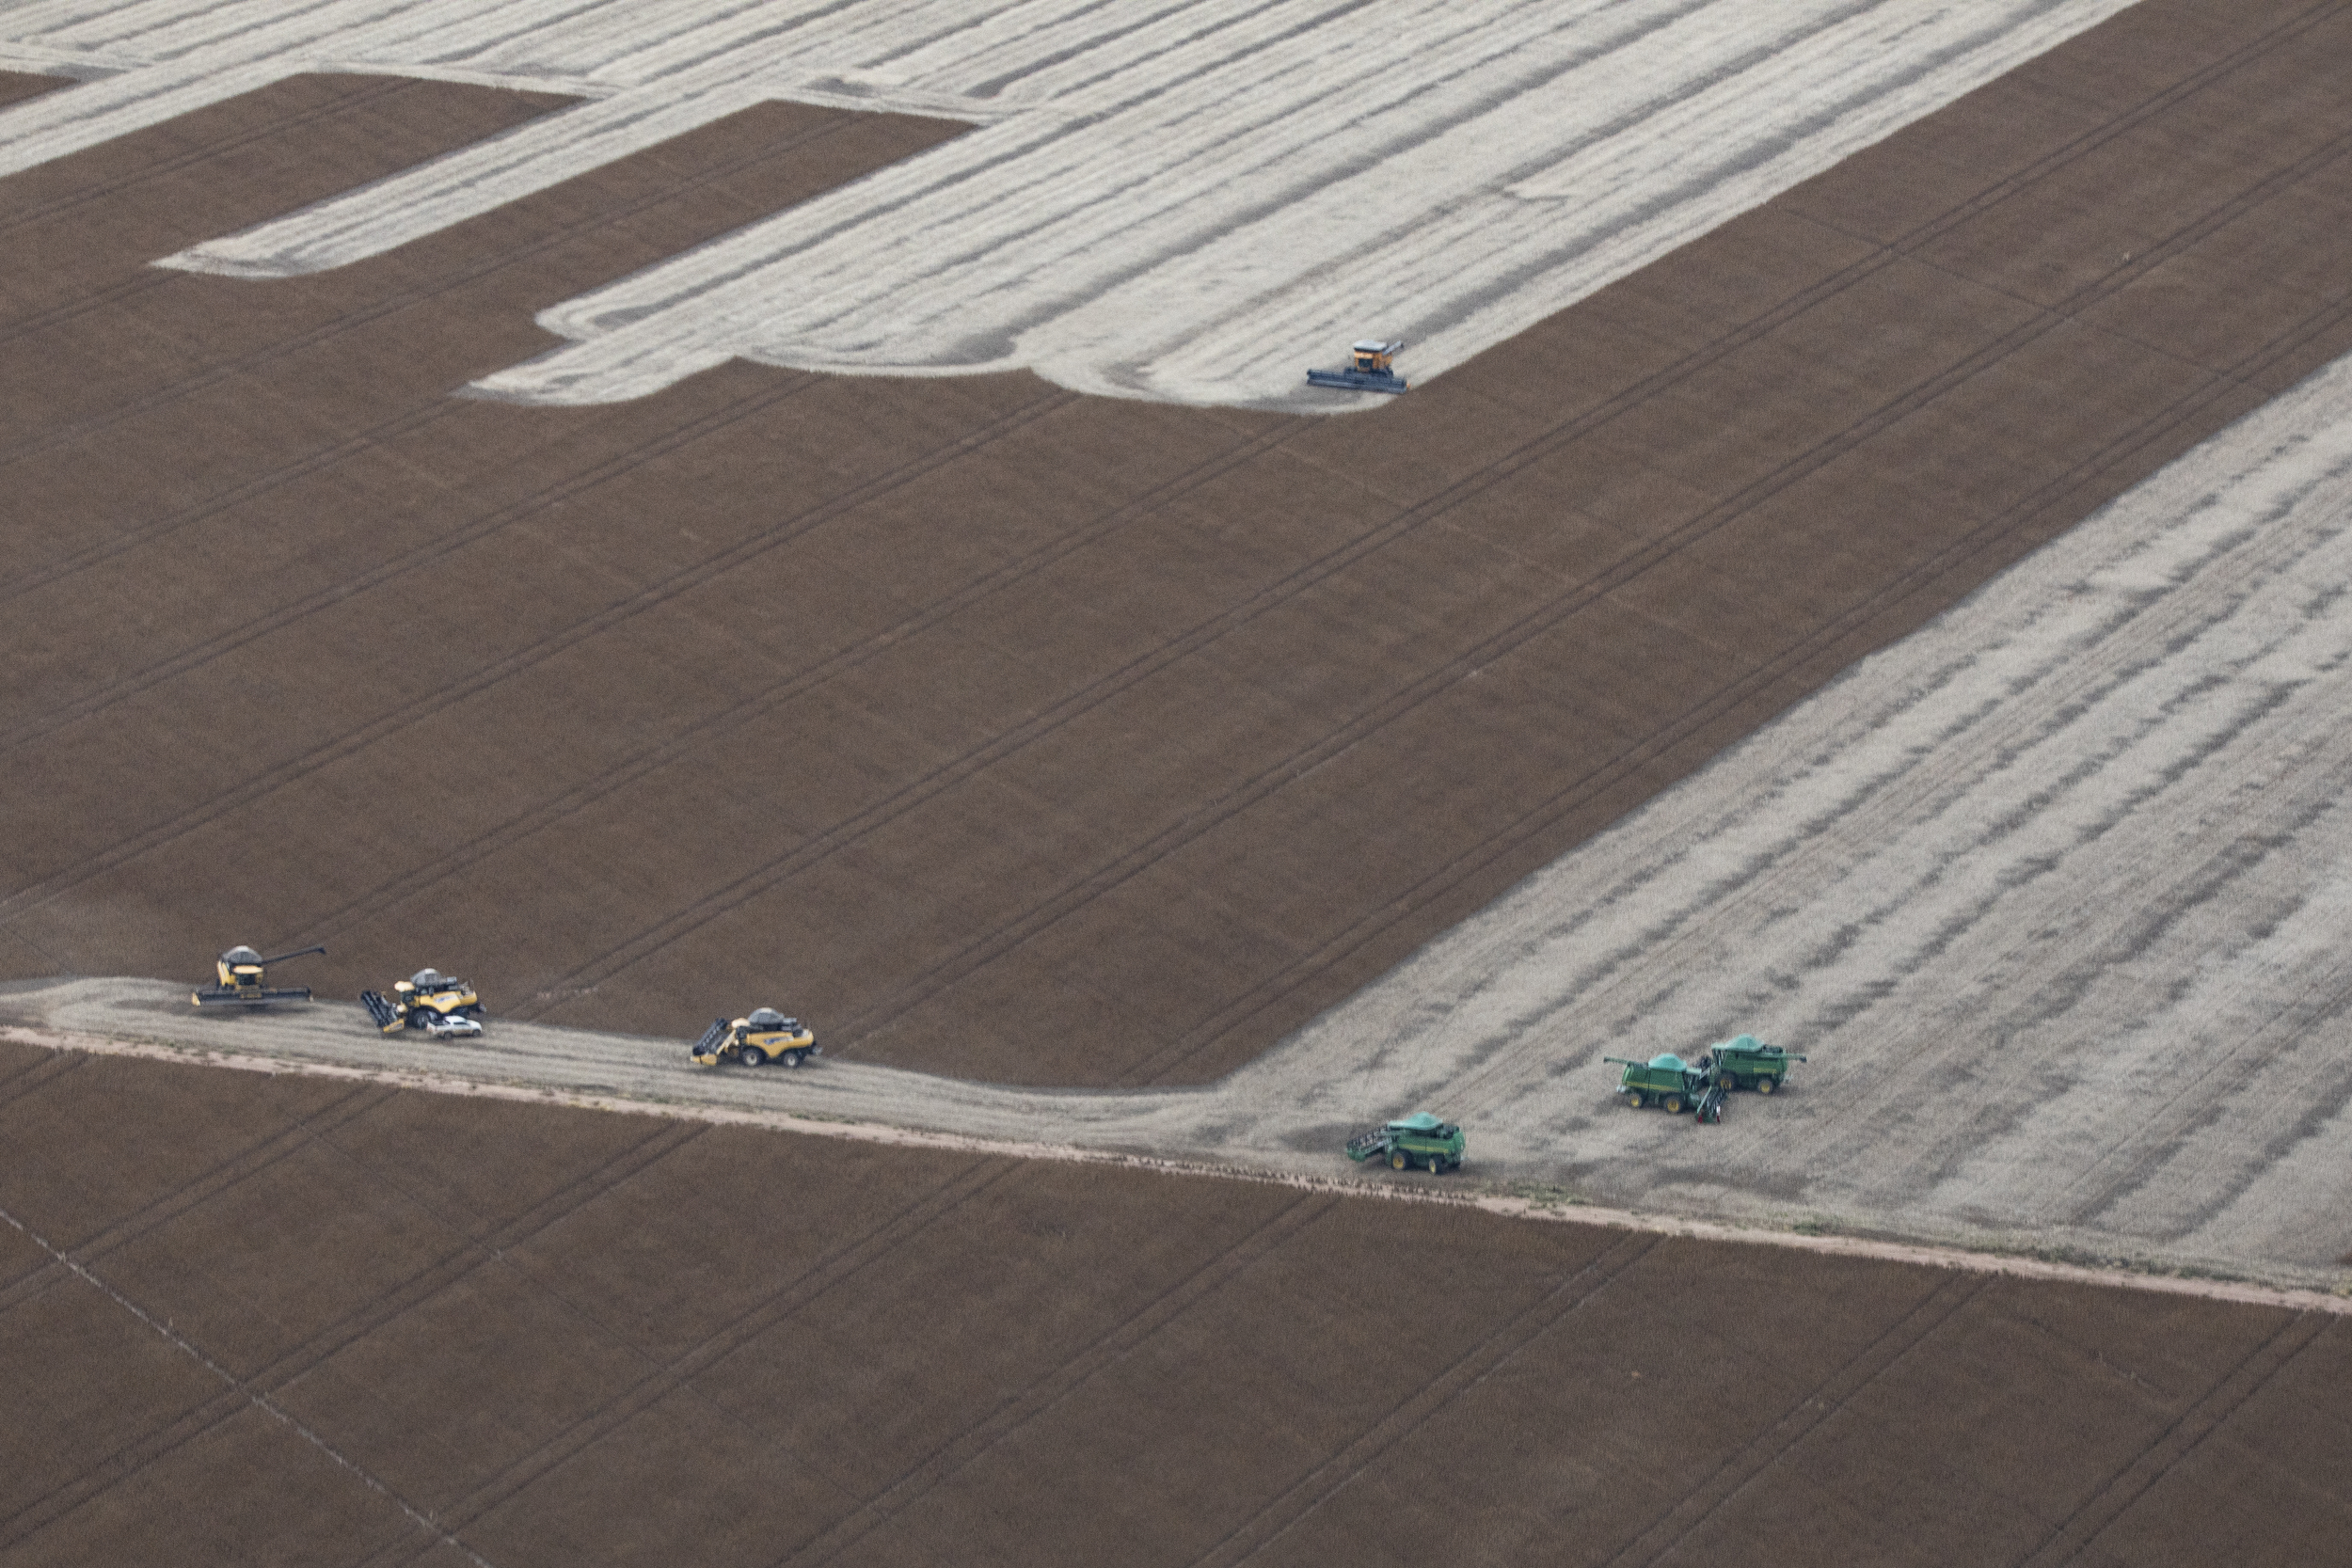 Aerial view of industrial farming machines working in a vast brown field of crops.